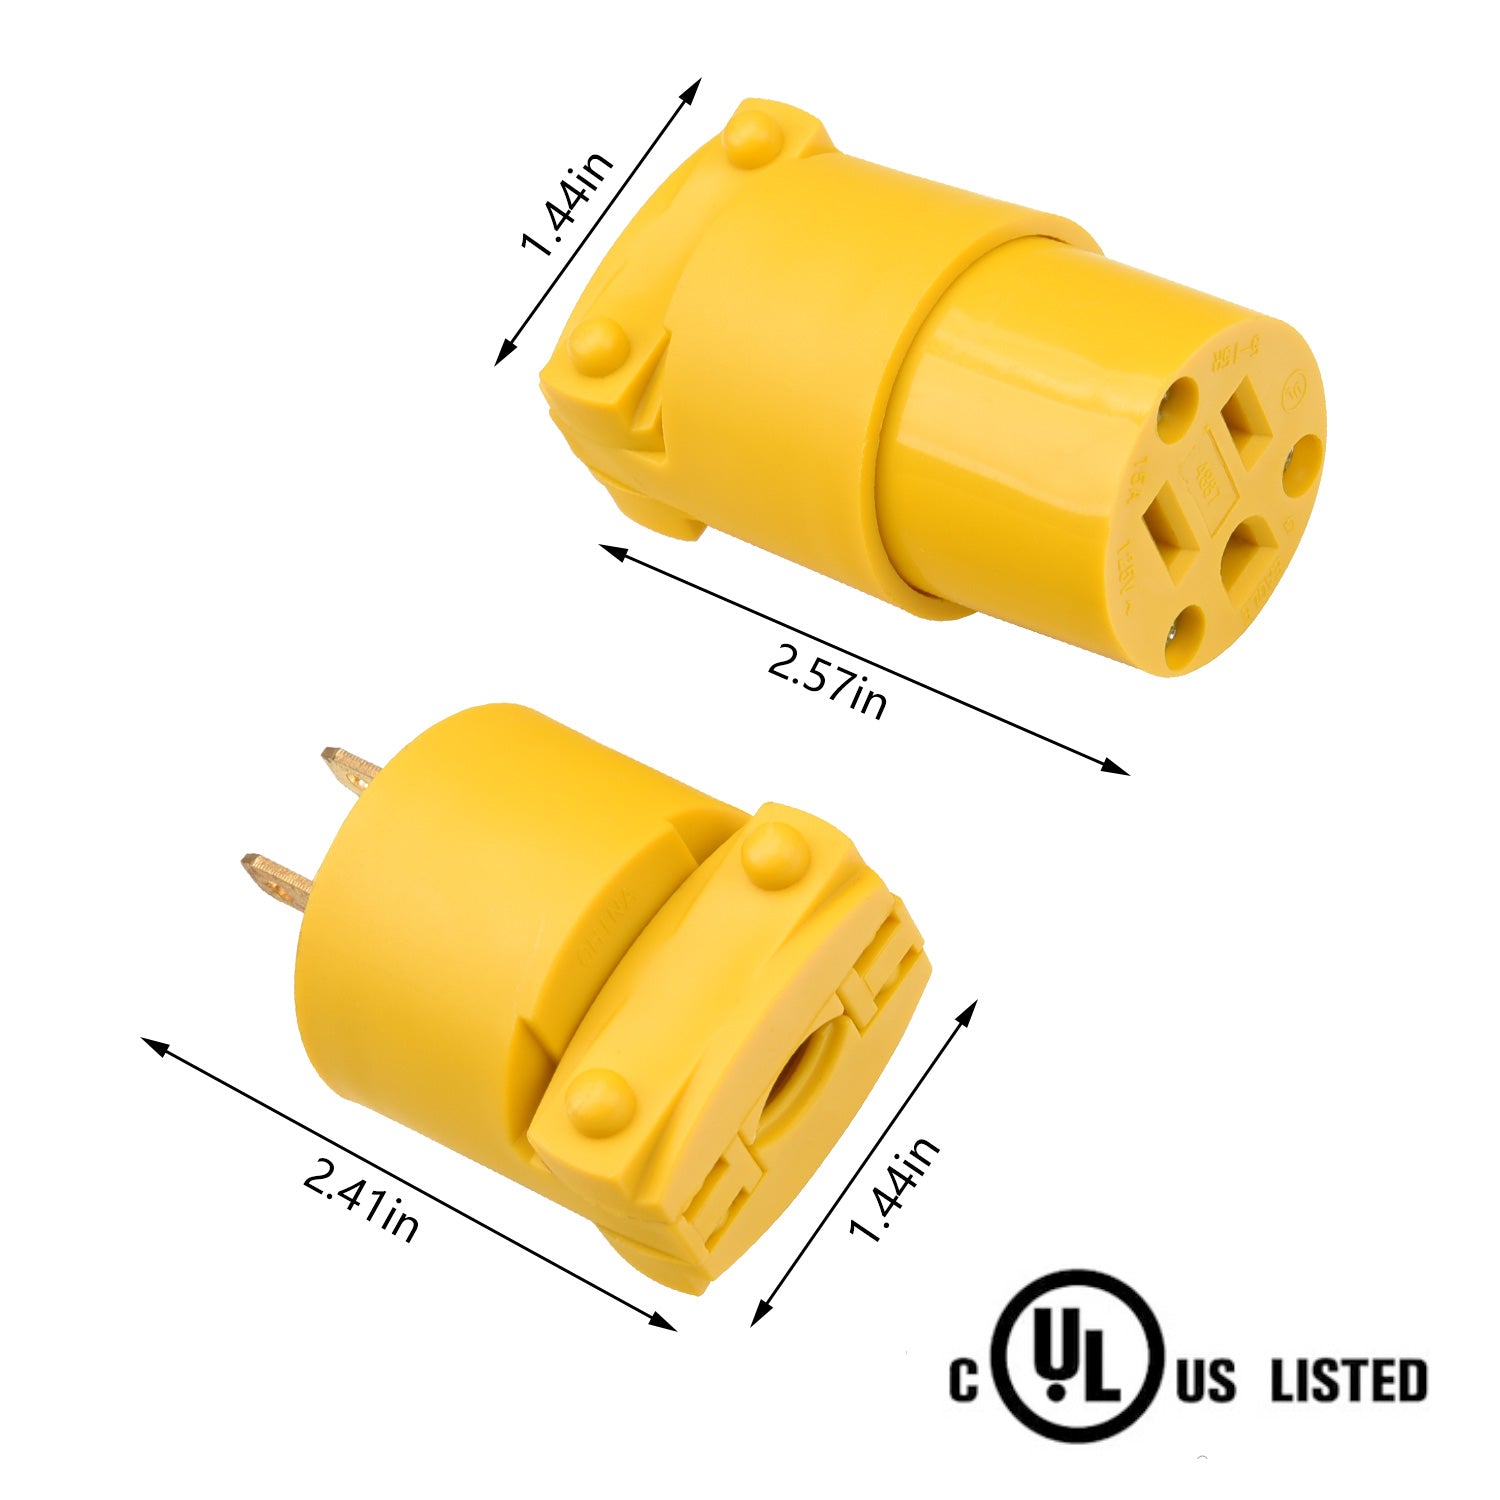 STARELO 10PCS Connector Extension Cord Ends Yellow Shell 125V 15A 2Pole 3Wire NEMA5-15R Industrial Grade 3-Prong Straight Blade Grounding Type,UL Listed(Female).